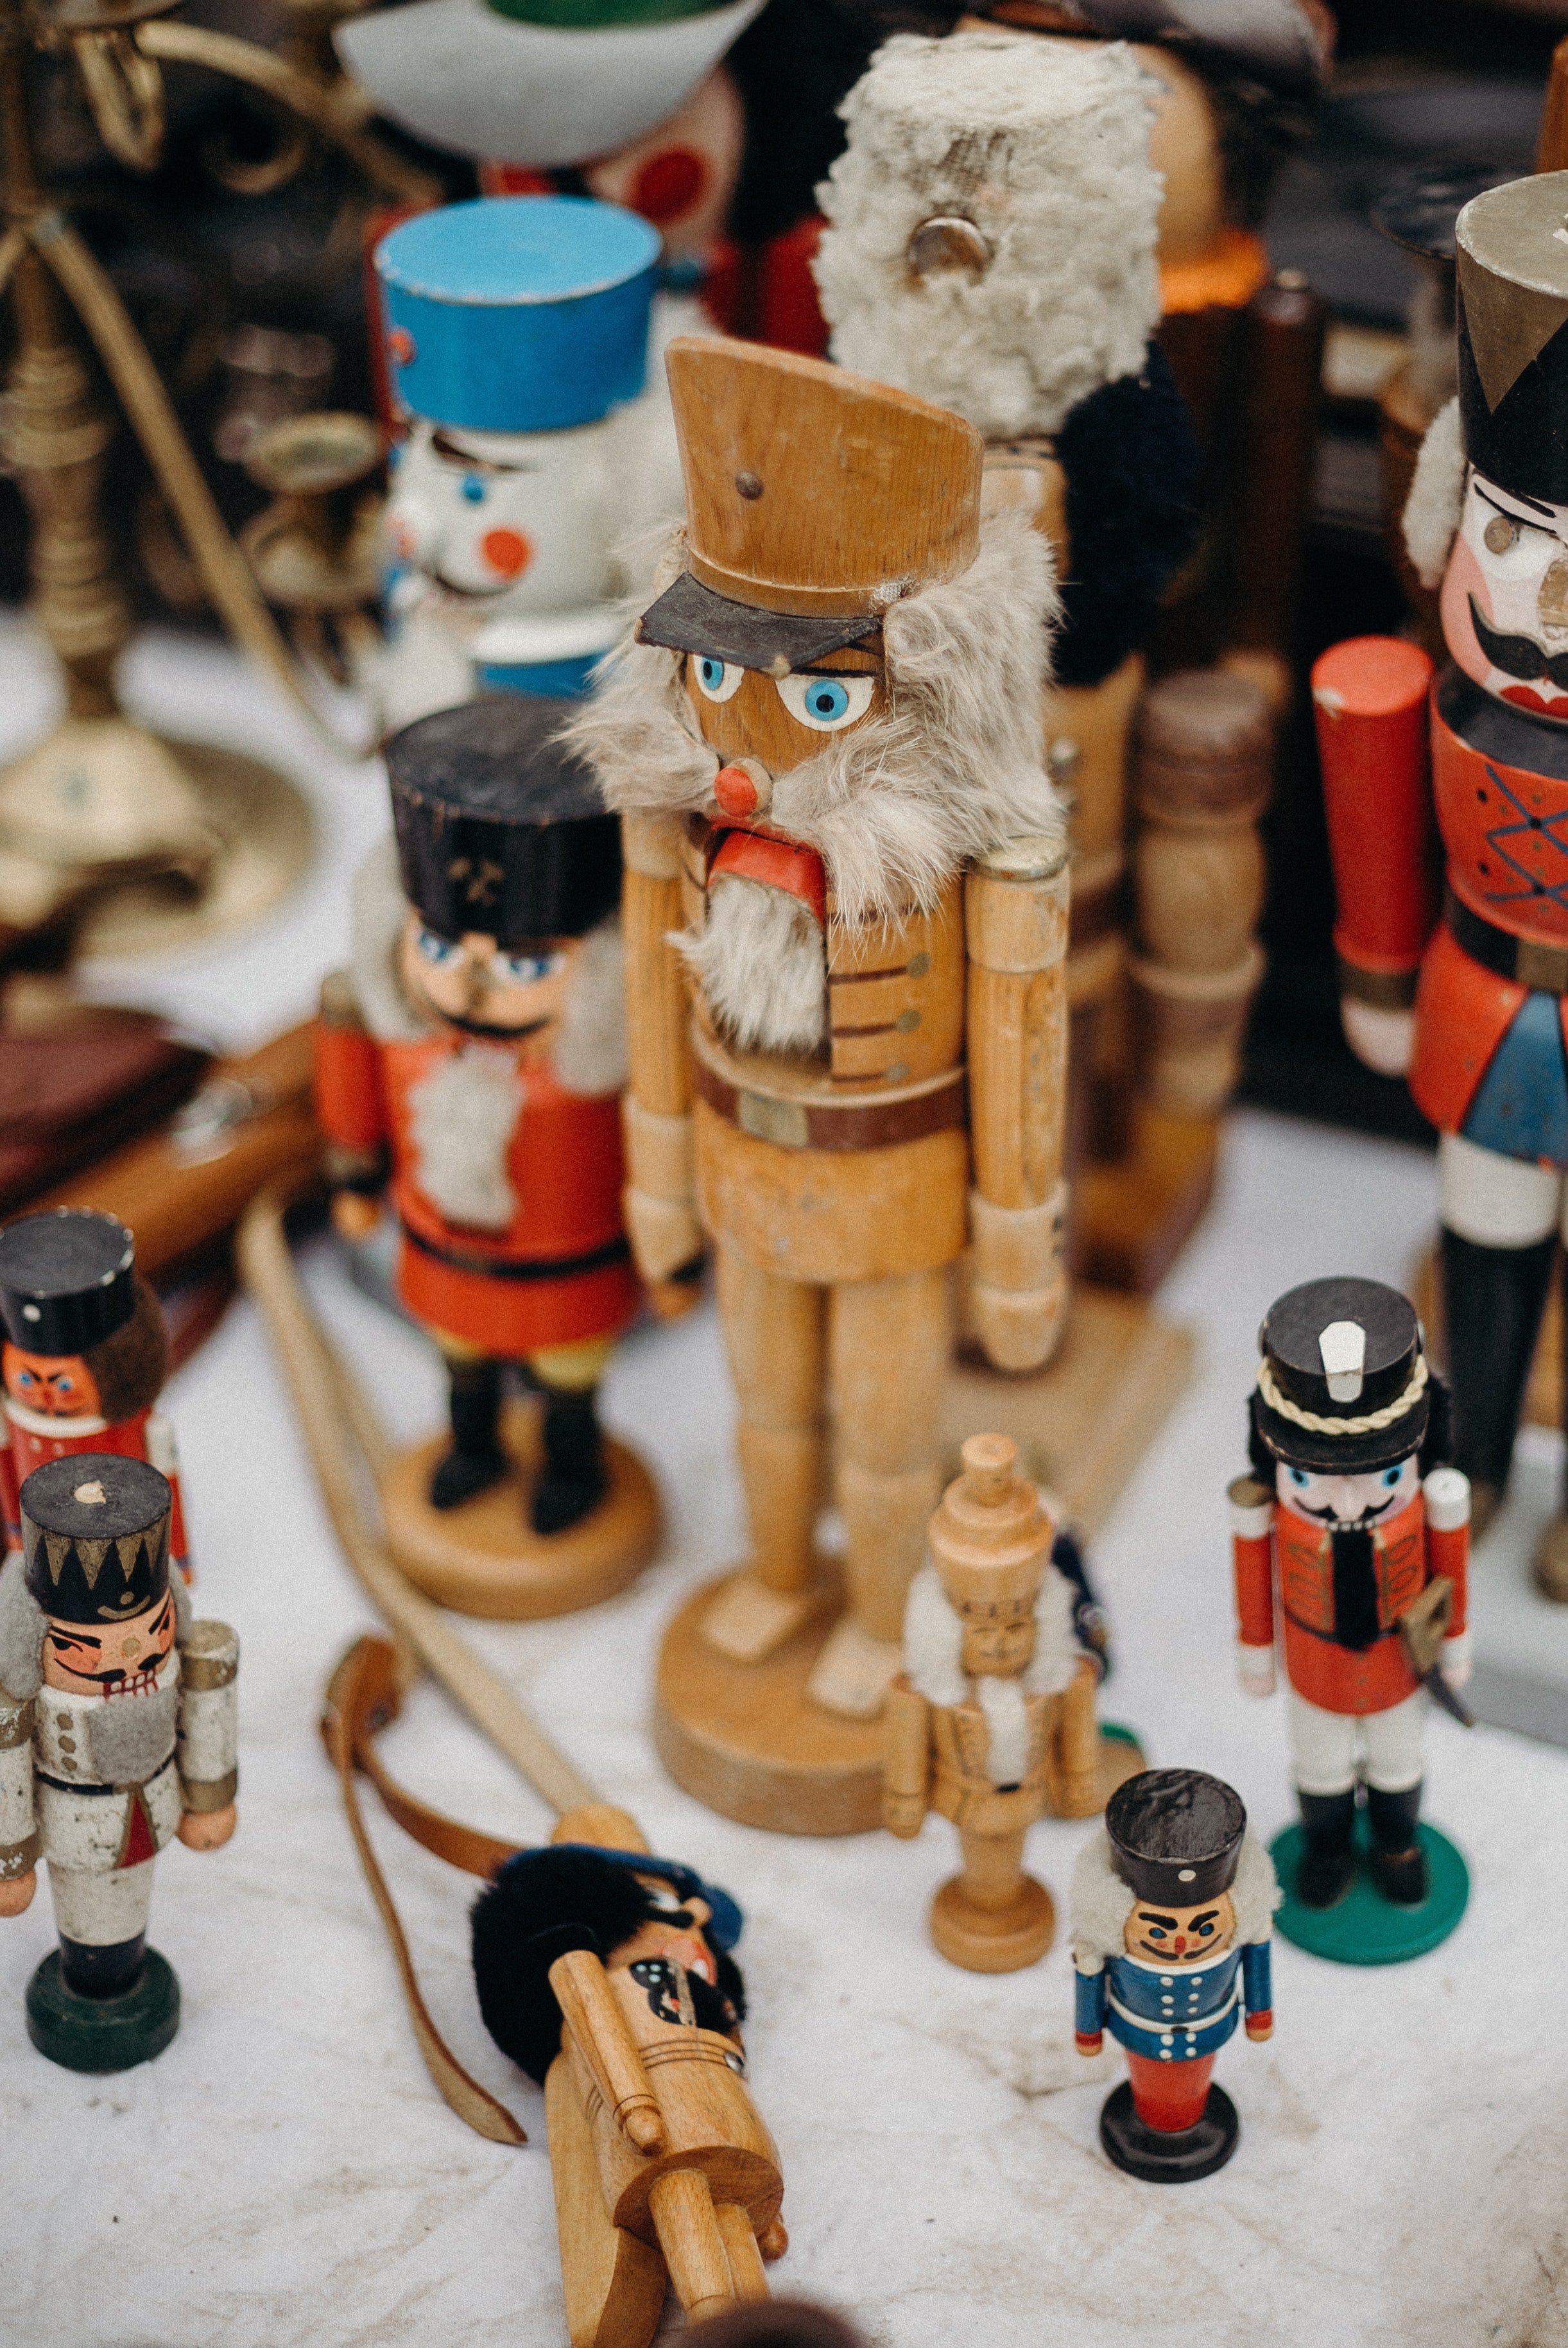 The treasure was a set of toy soldiers | Photo: Pexels